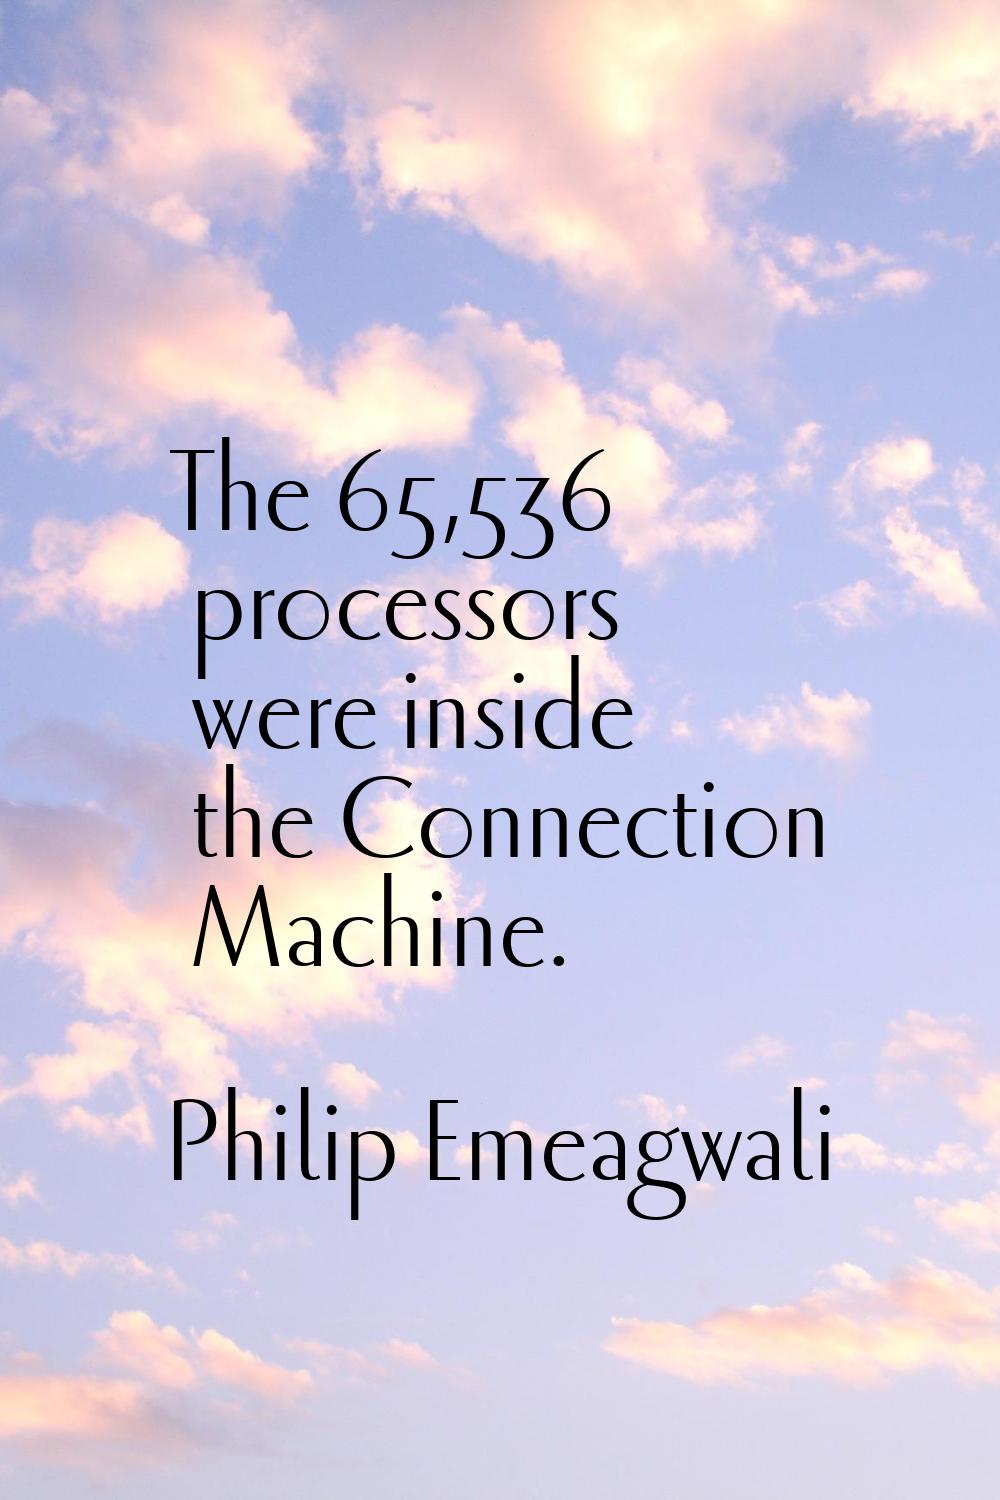 The 65,536 processors were inside the Connection Machine.